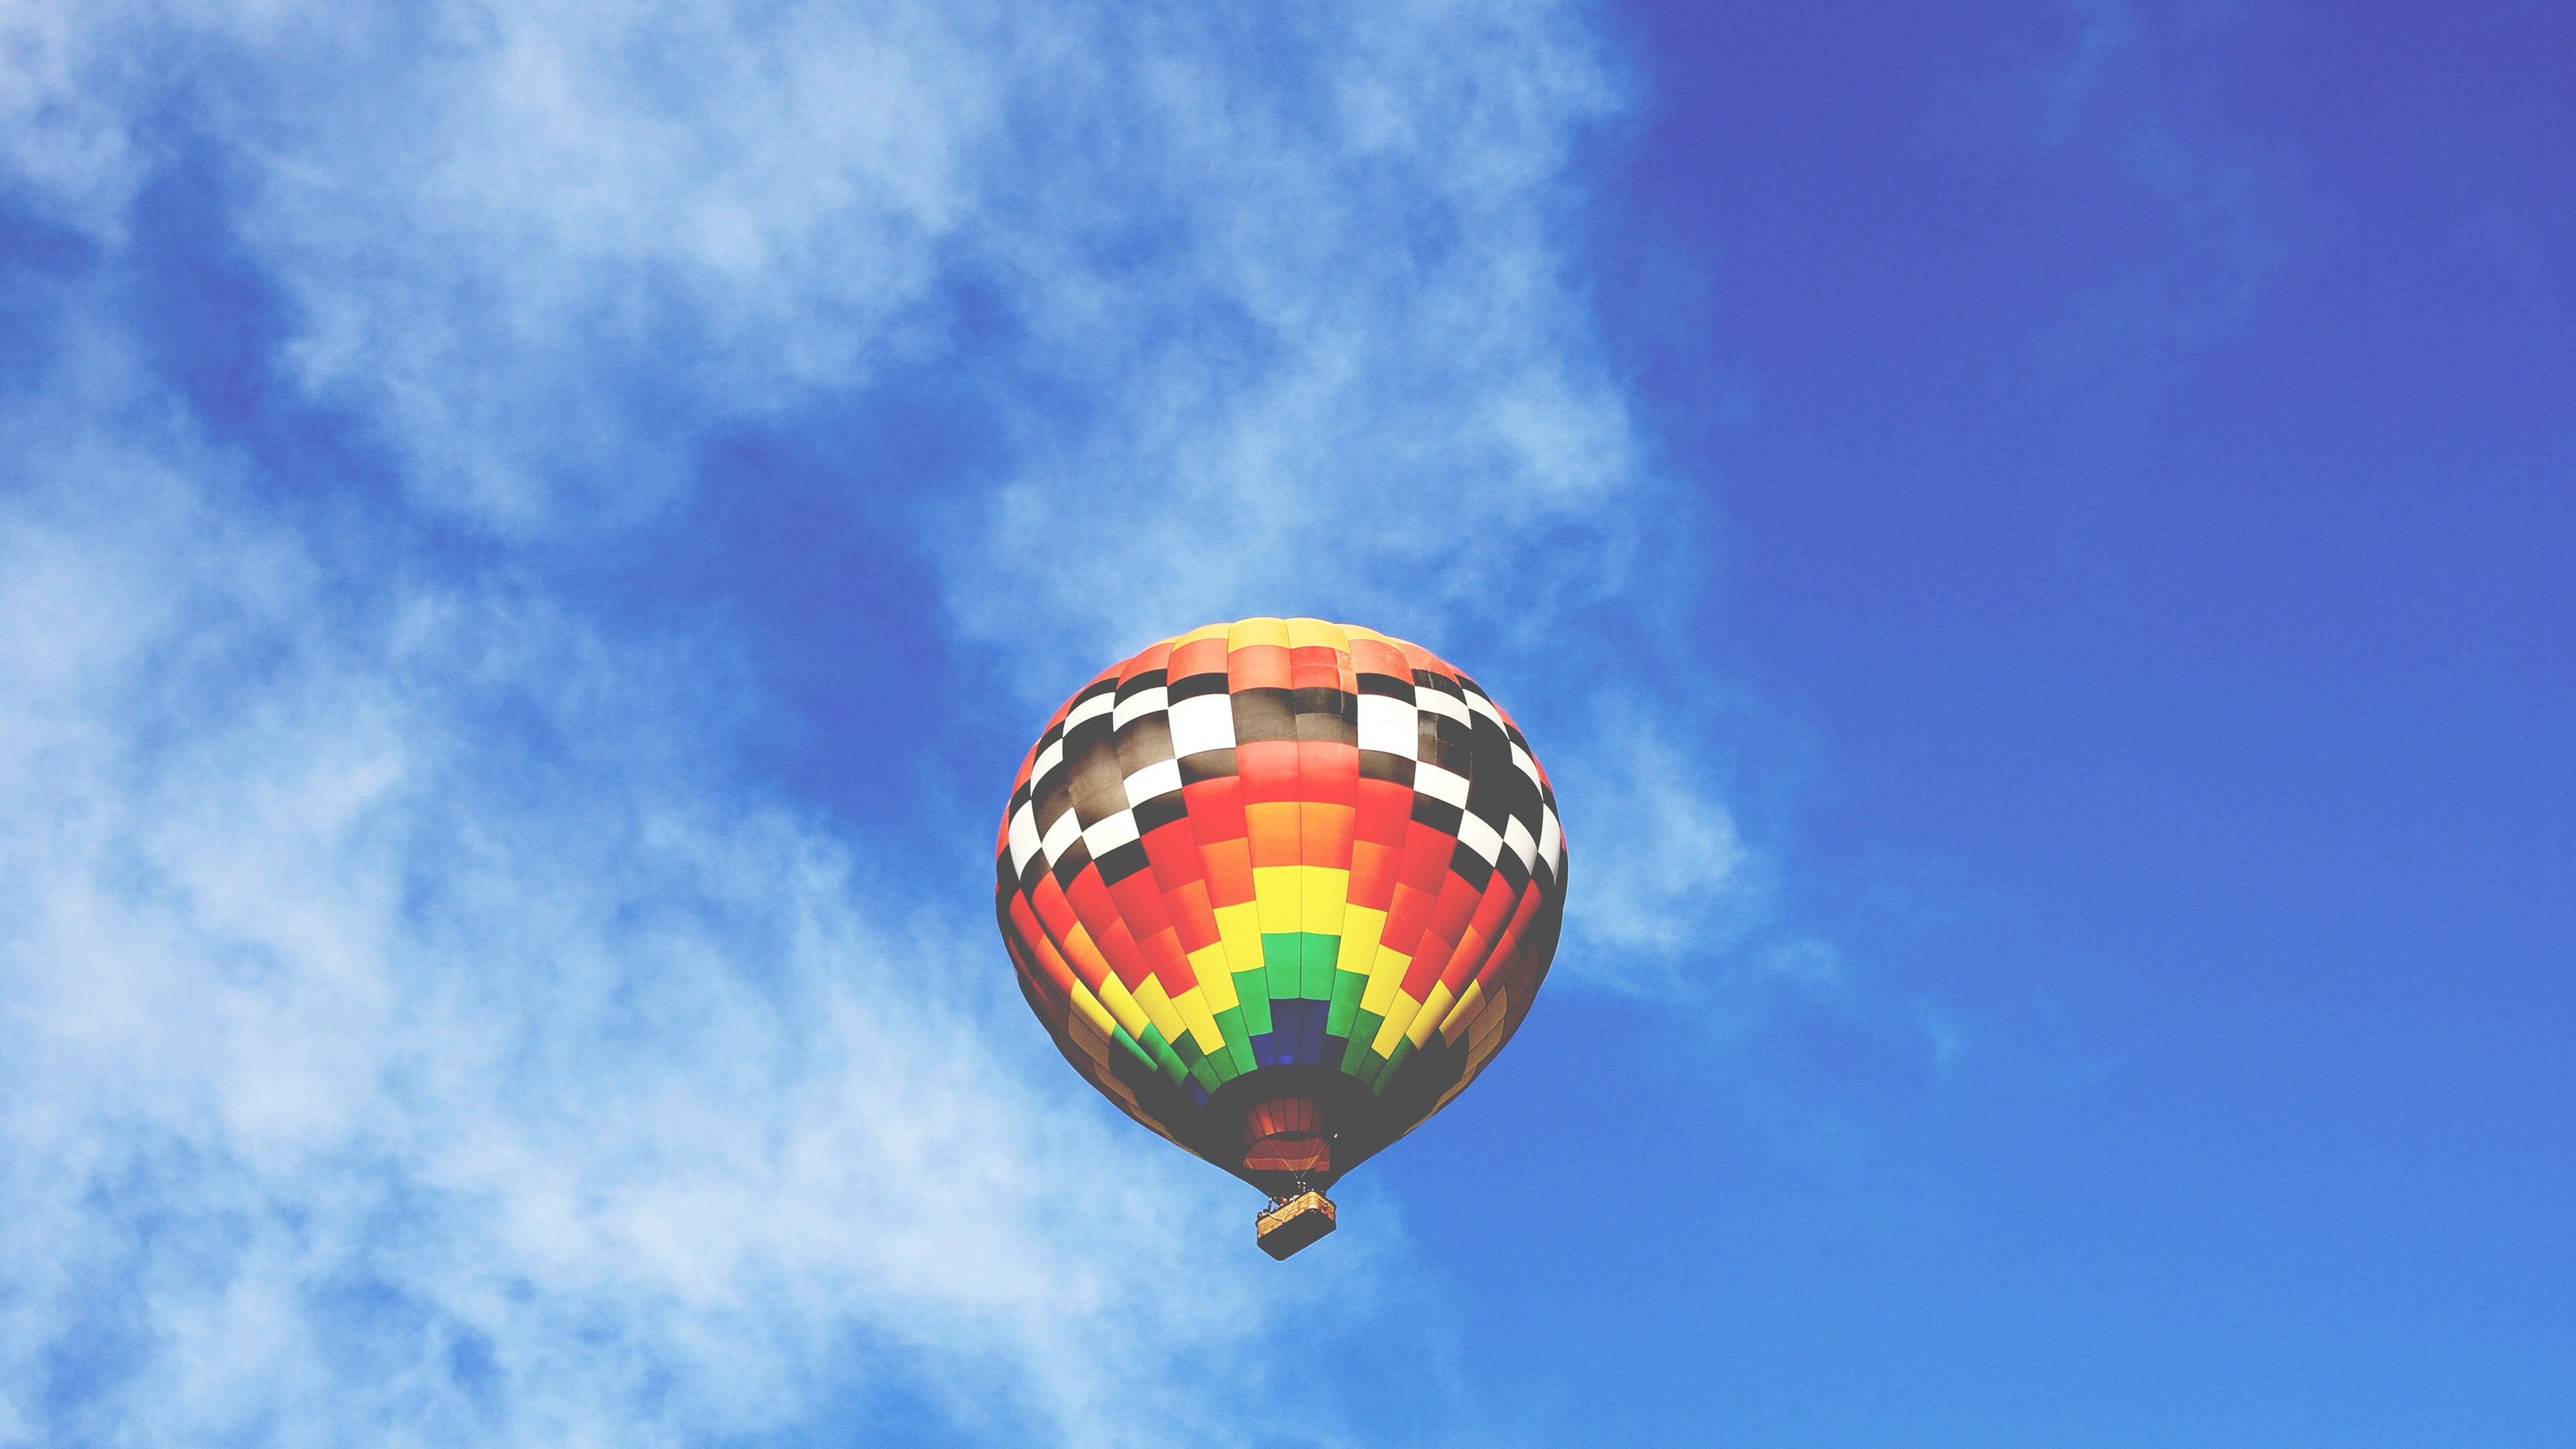 Multicolored hot air balloon, photography, clear sky, clouds, hot air ...